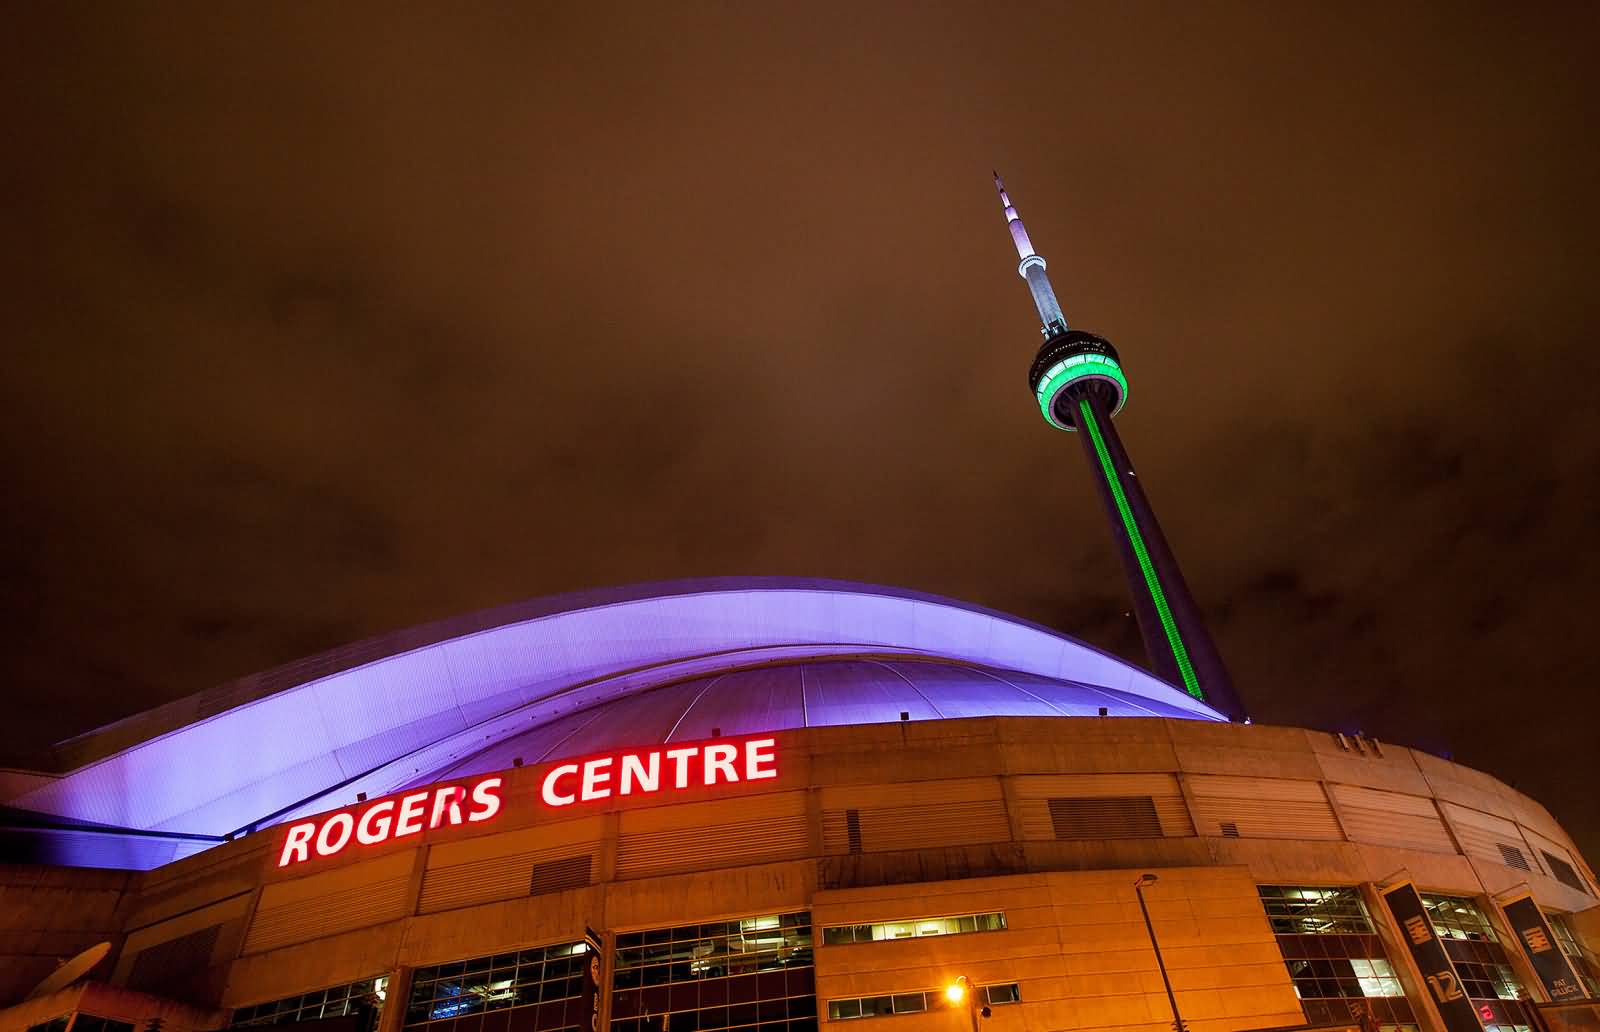 The CN Tower Is Lit In Green And White Colors At Night